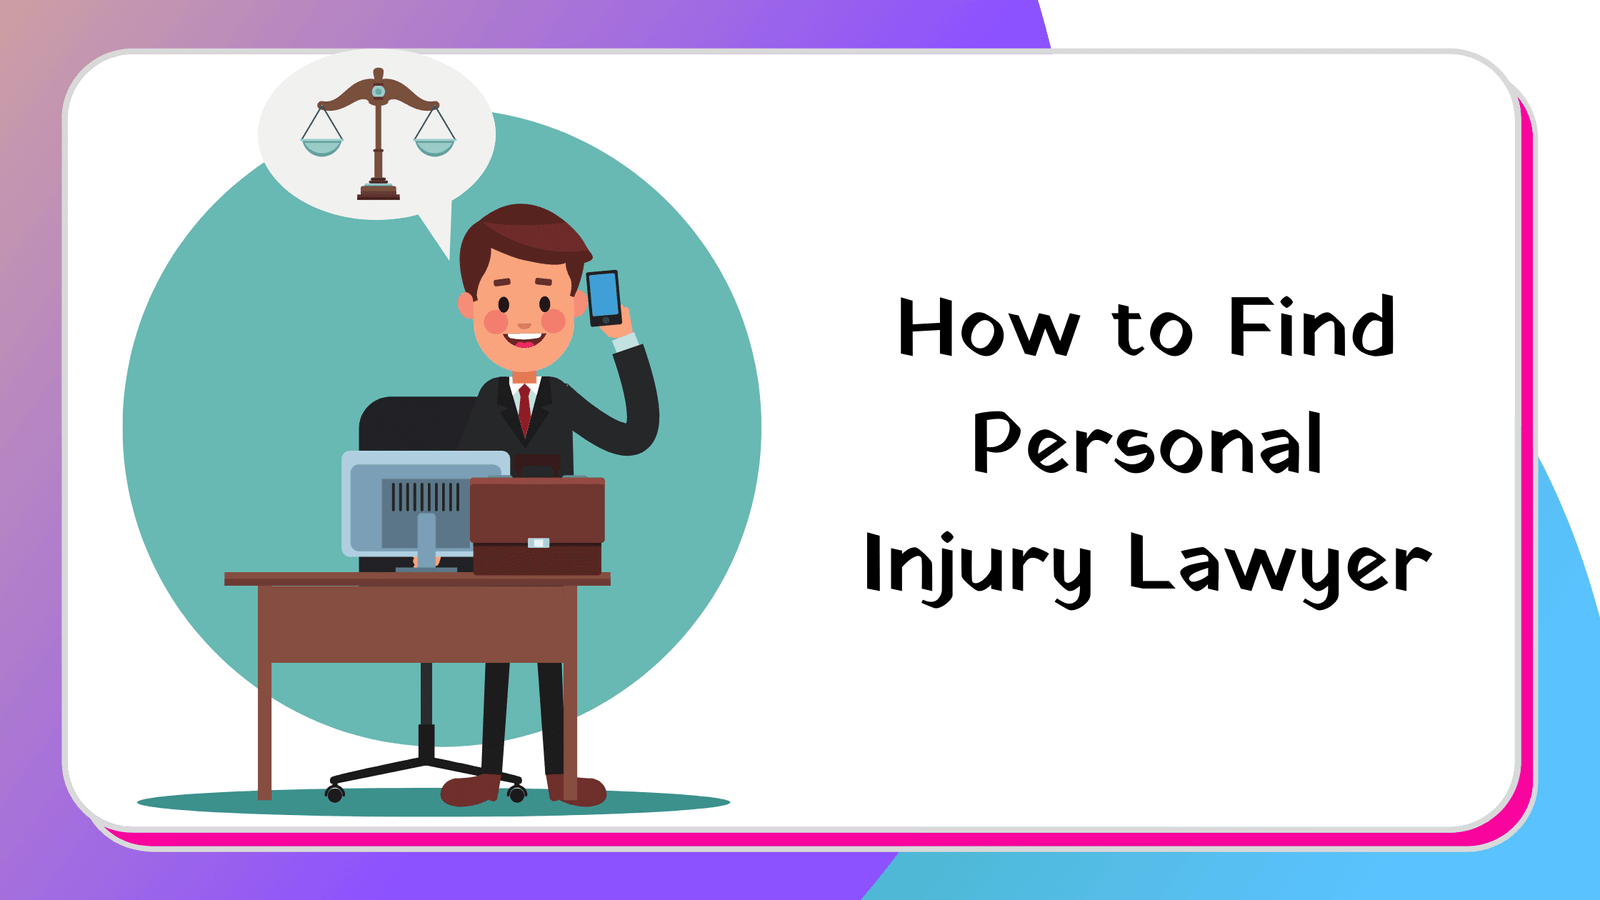 How to Find Personal Injury Lawyer